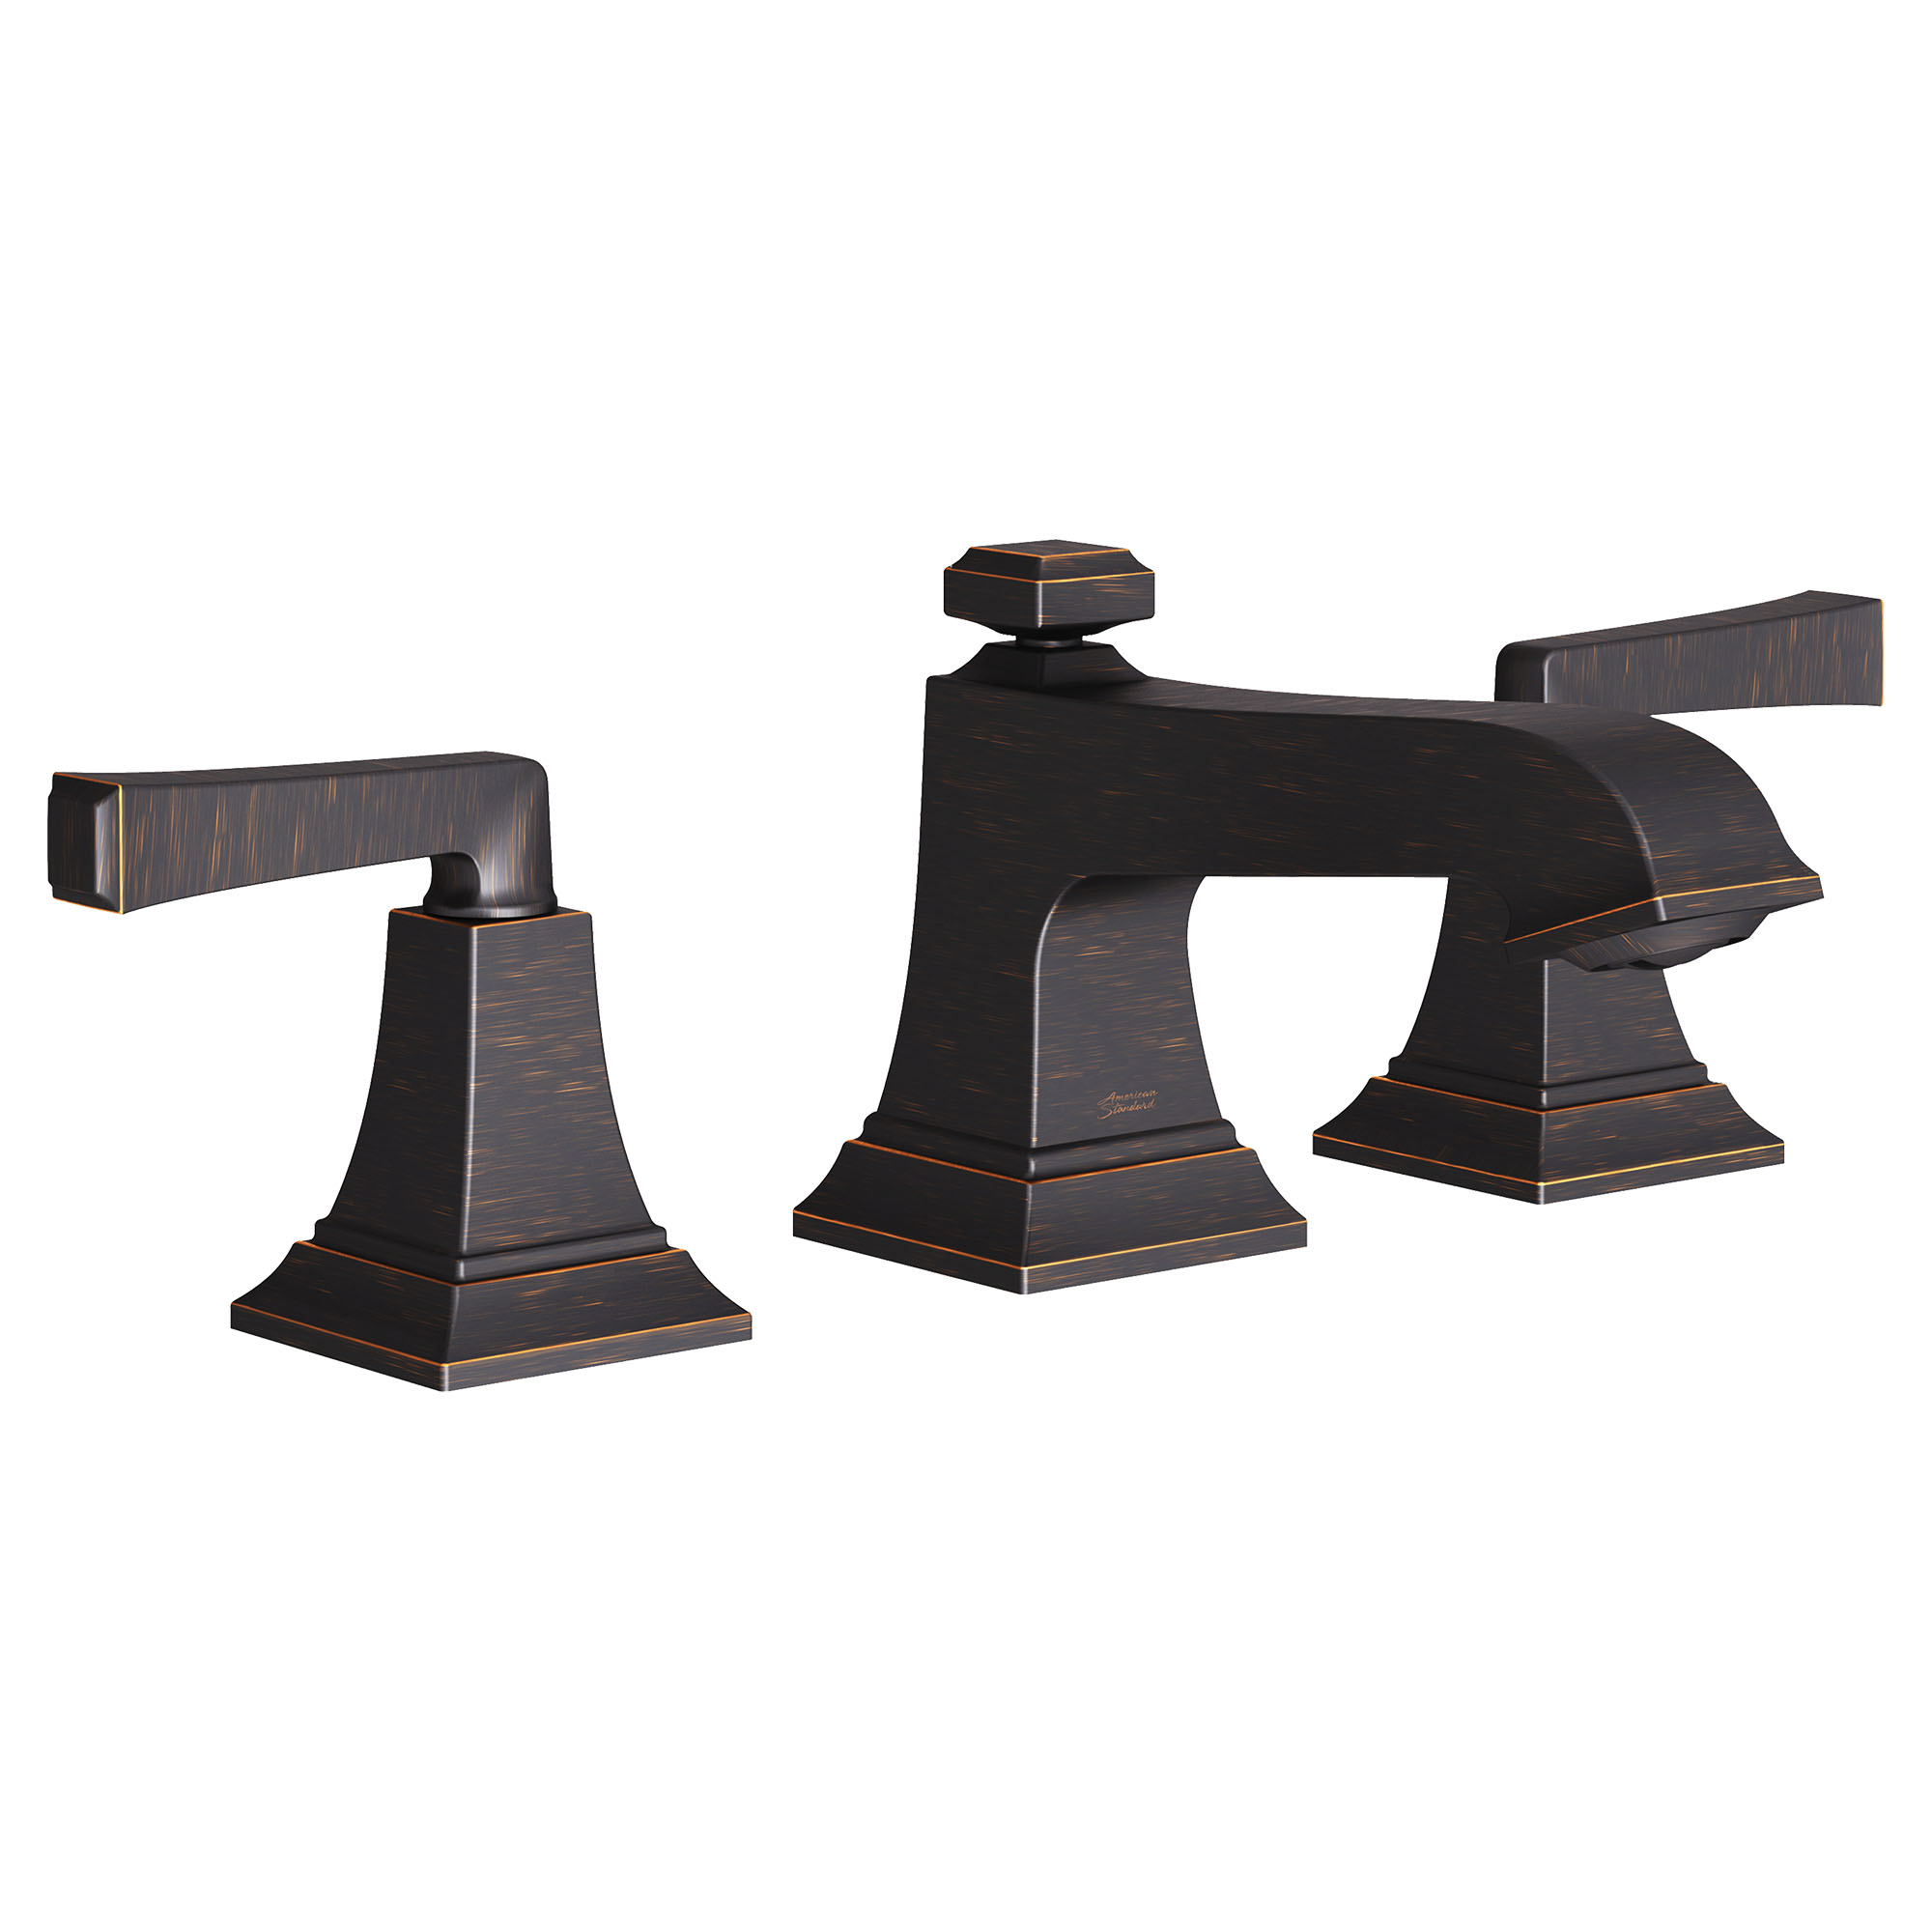 Town Square™ S 8-Inch Widespread 2-Handle Bathroom Faucet 1.2 gpm/4.5 L/min With Lever Handles